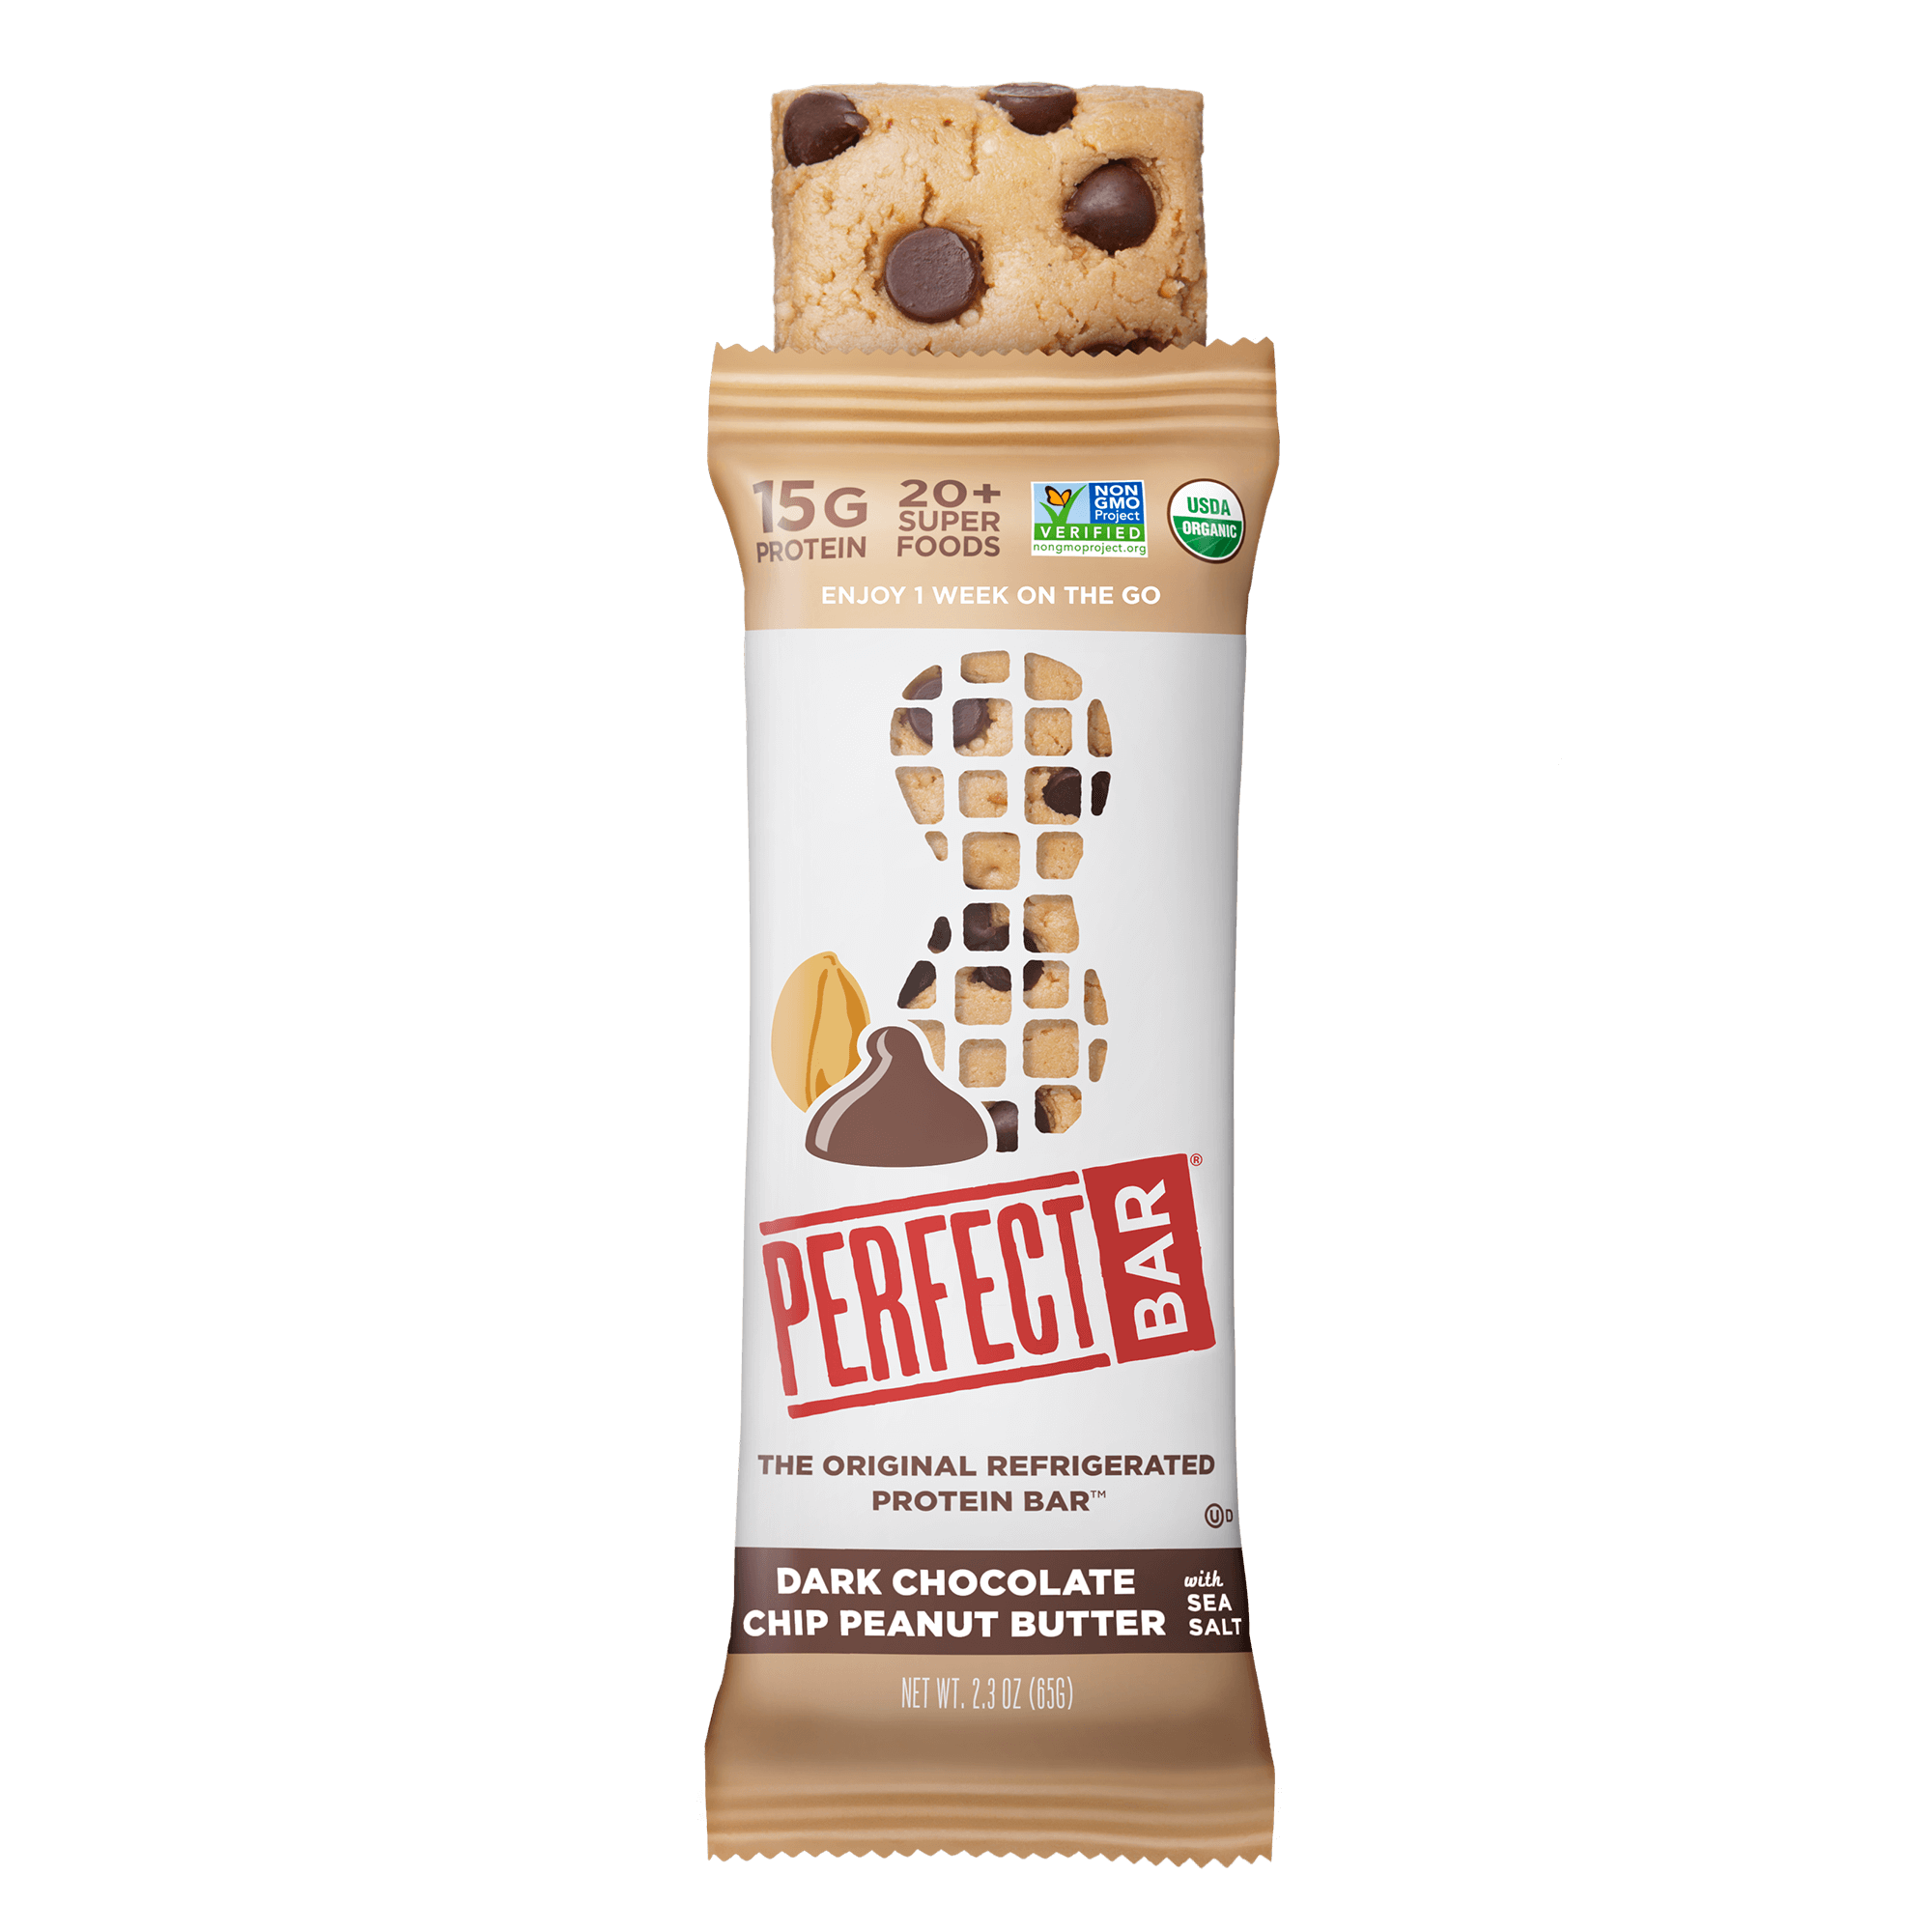 Live Pure Smoothie Cubes Chocolate Peanut Butter Protein